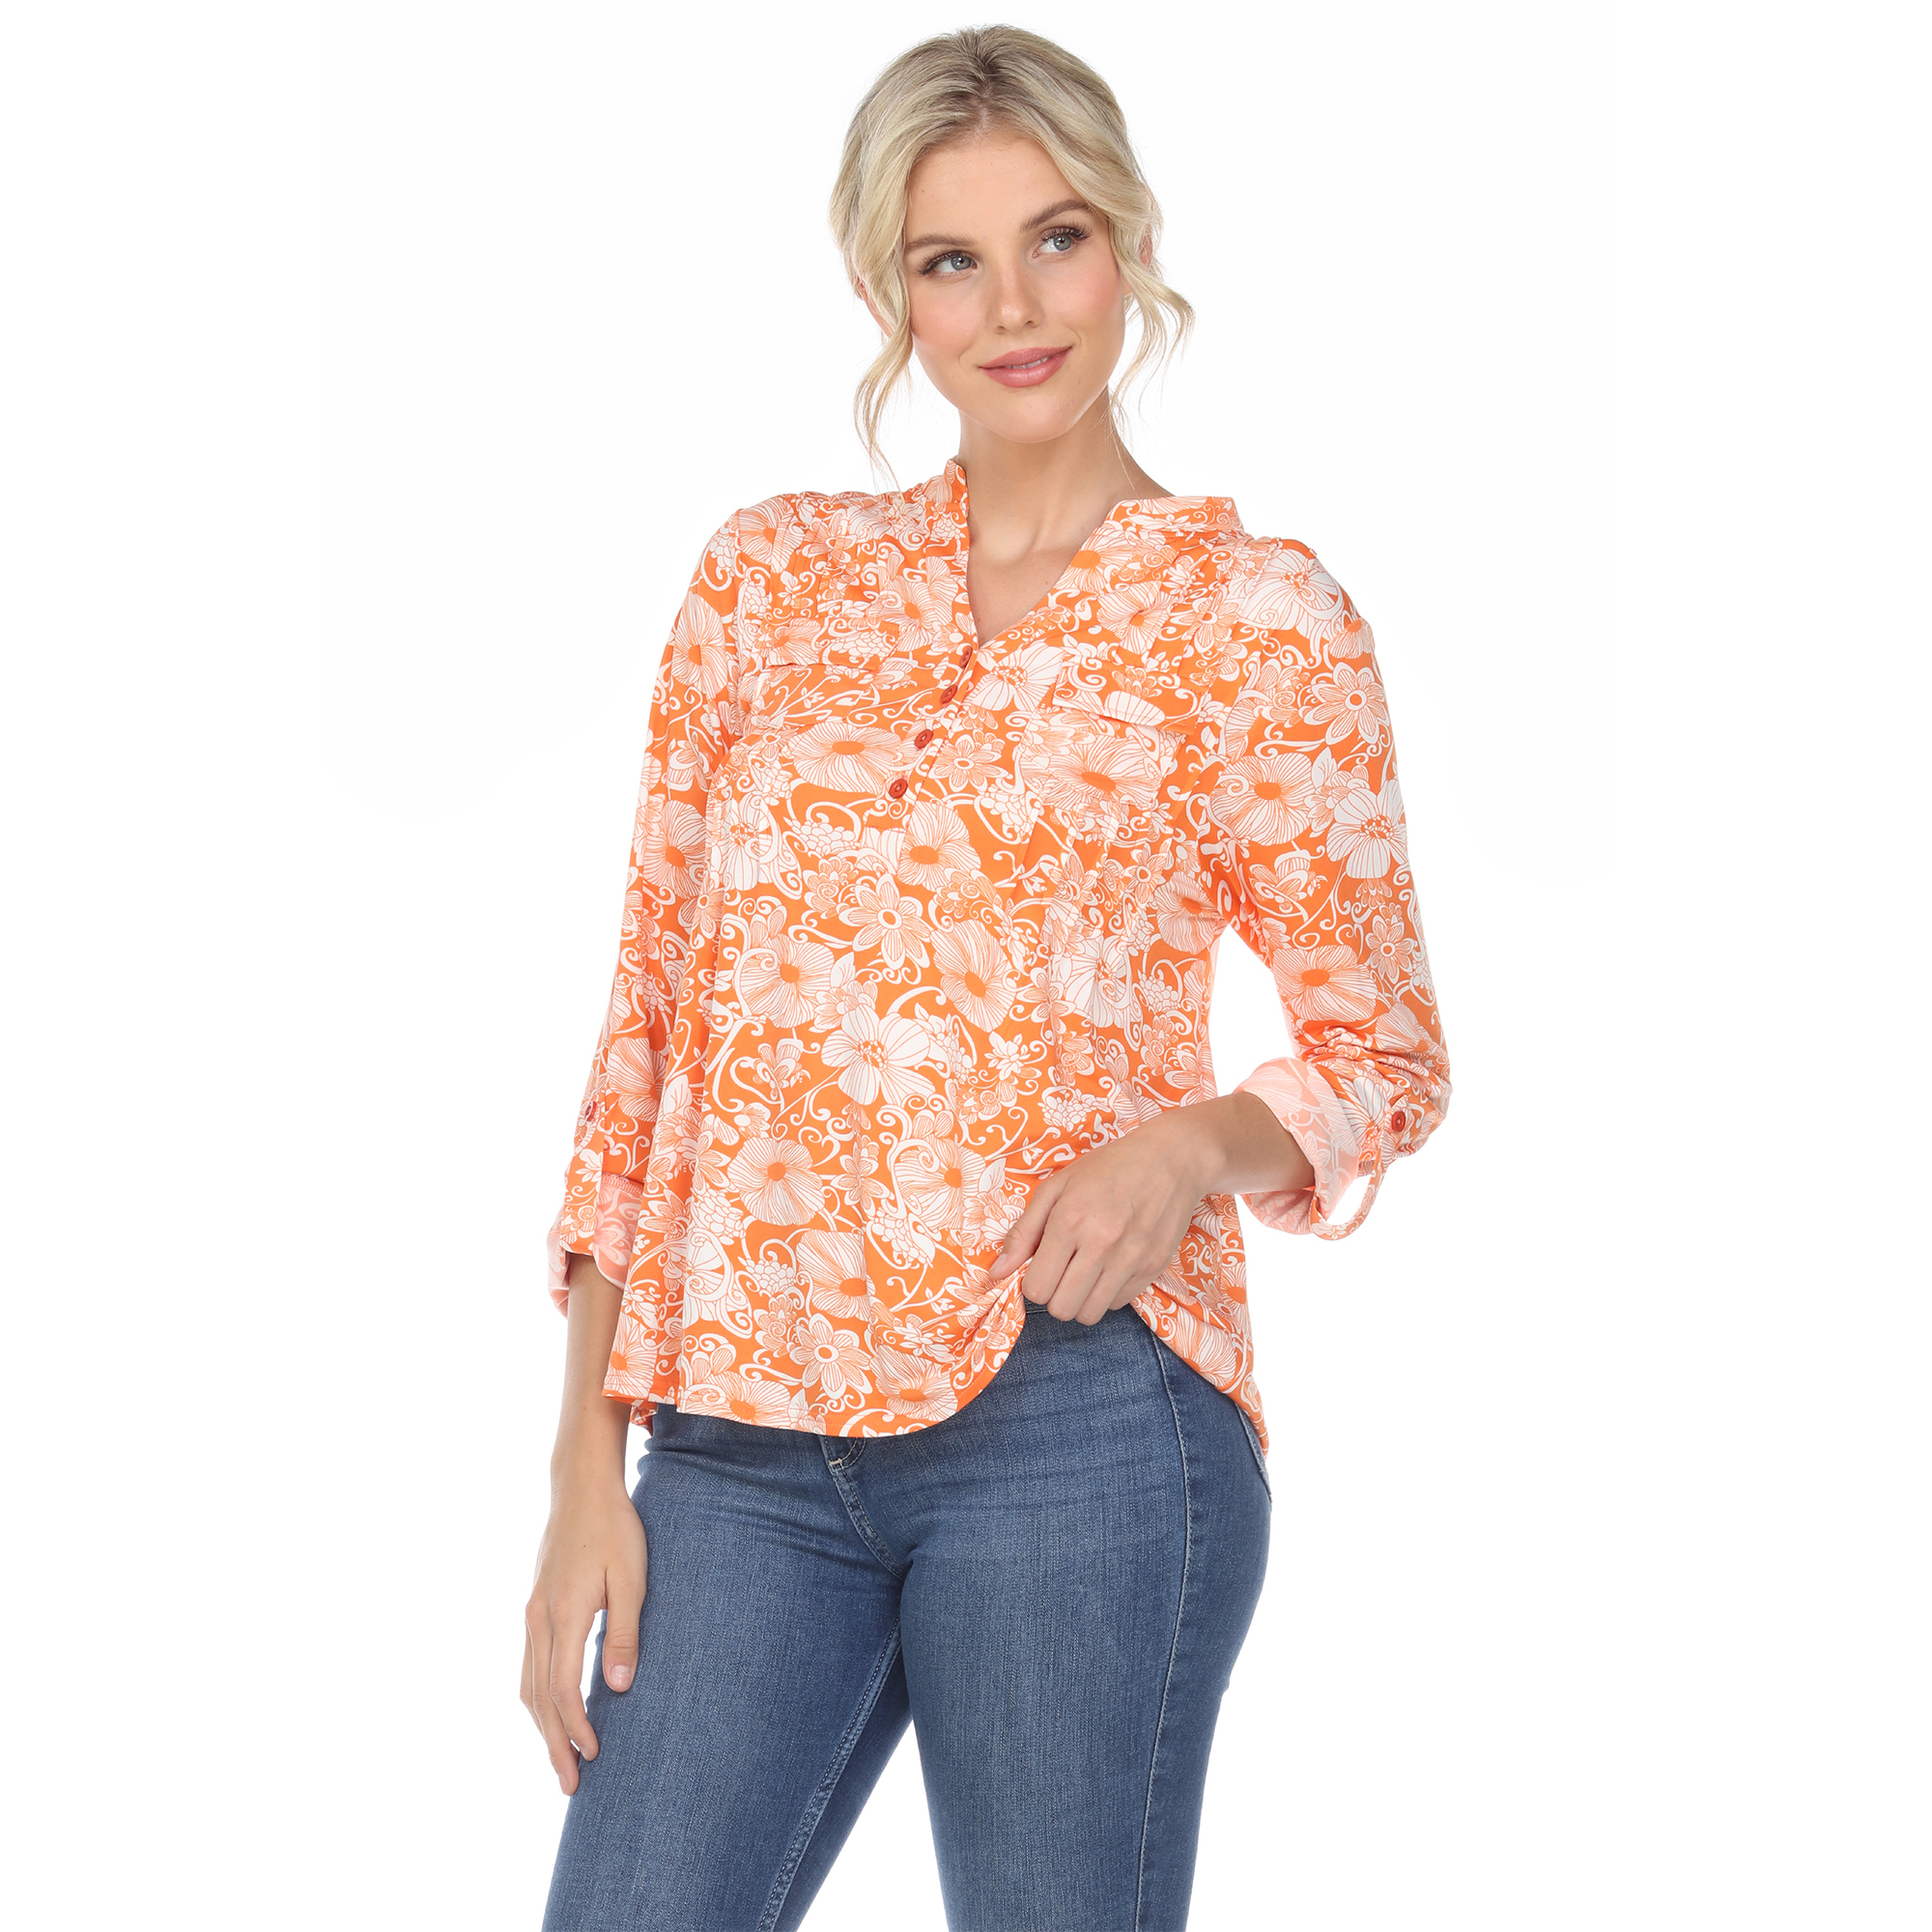 White Mark Women's Pleated Long Sleeve Floral Print Blouse - Orange, Small